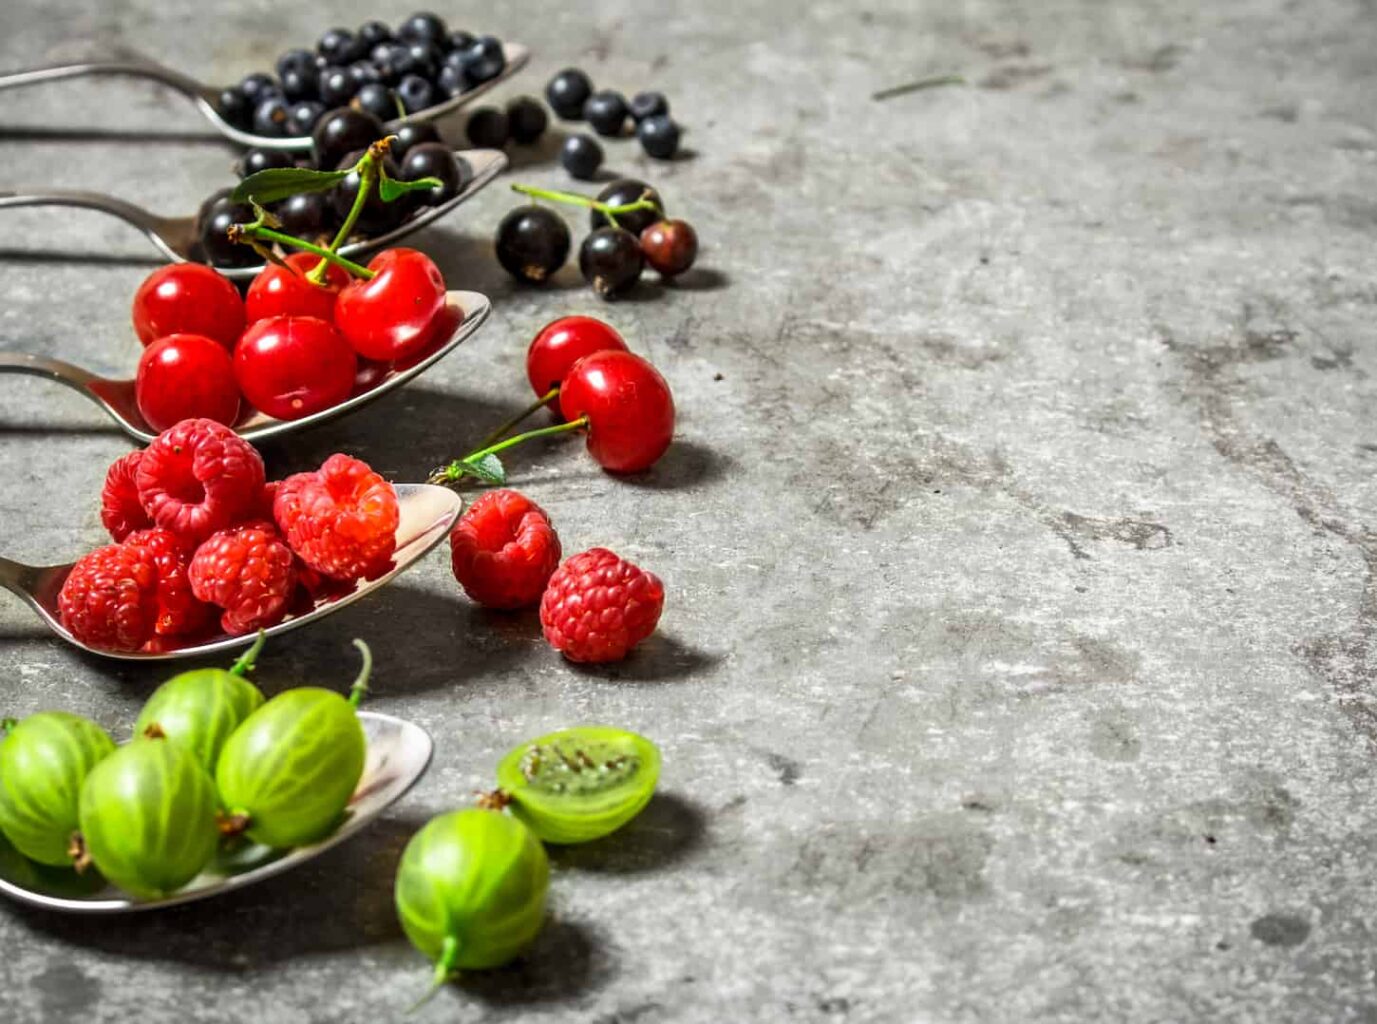 An image of different berries placed in spoons on a granite countertop.